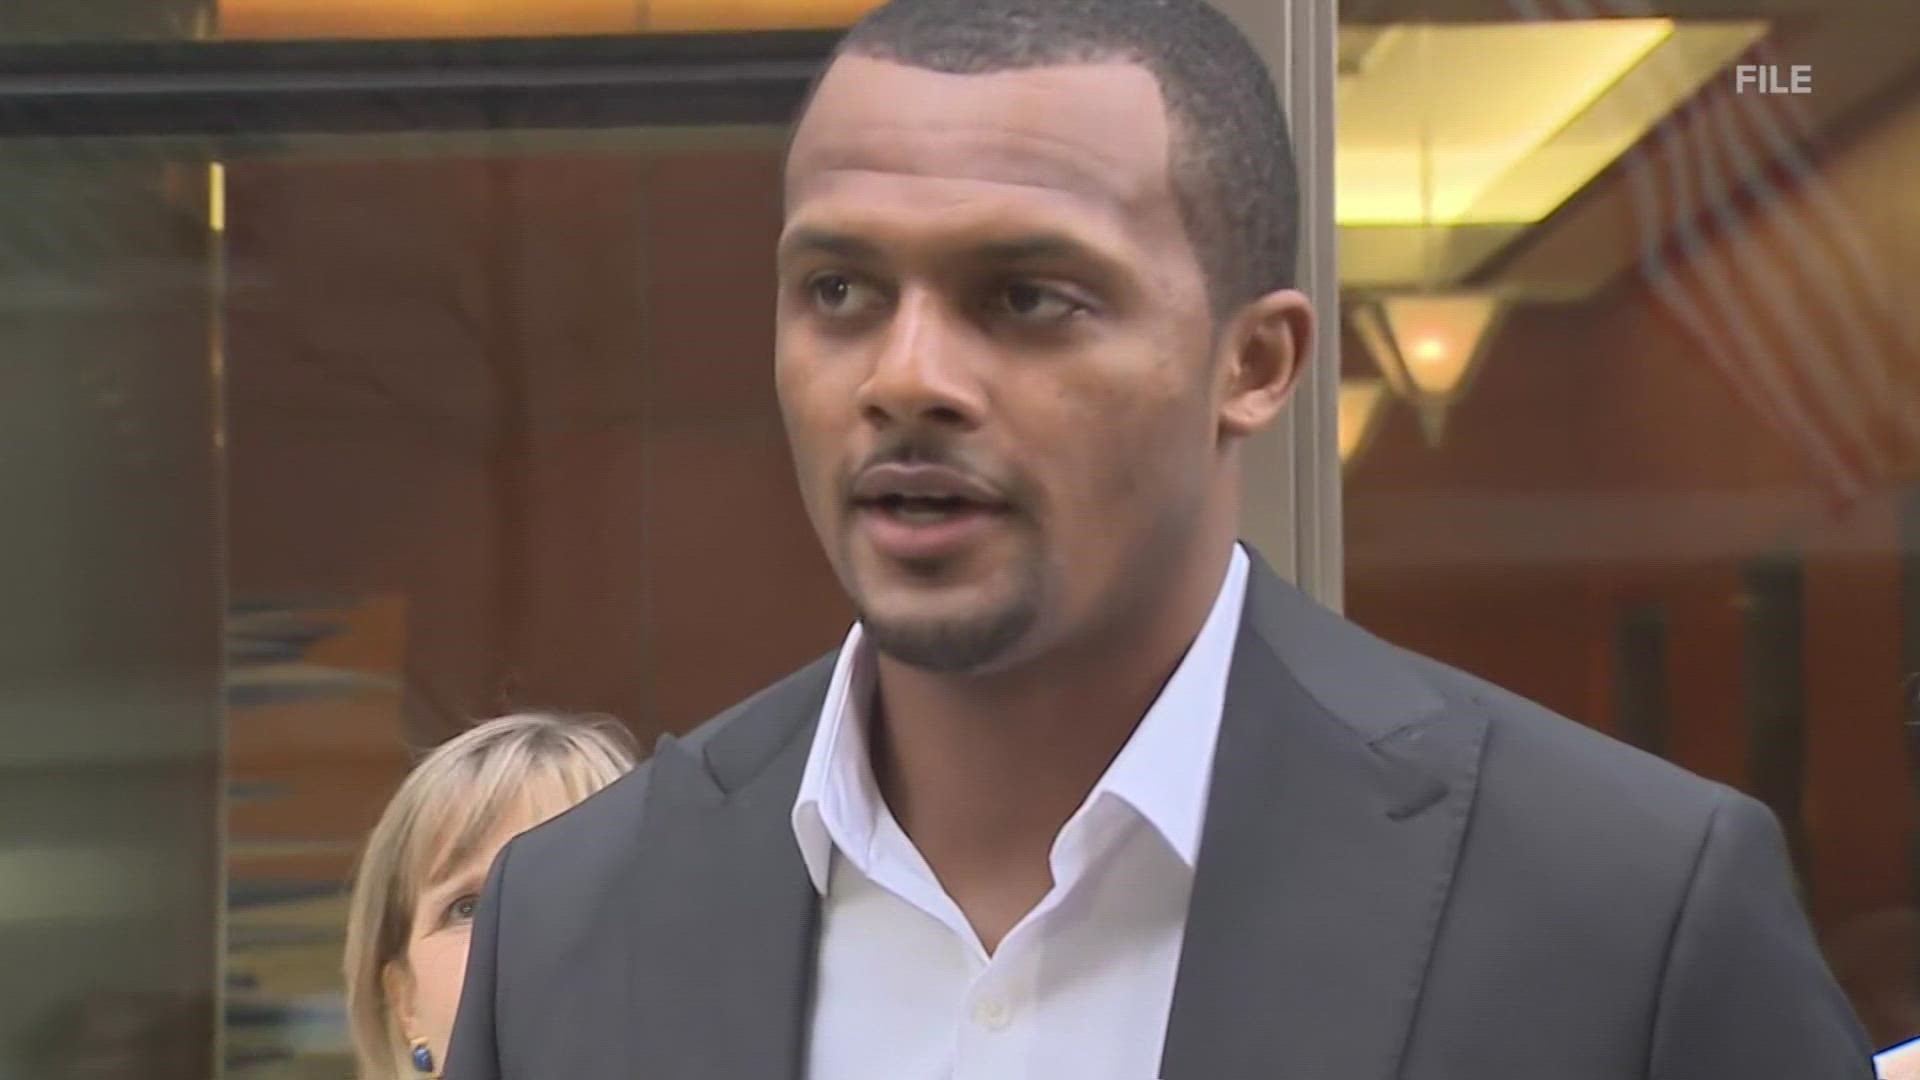 On Friday, Deshaun Watson was cleared of any criminal wrongdoing.  But the civil cases continue.